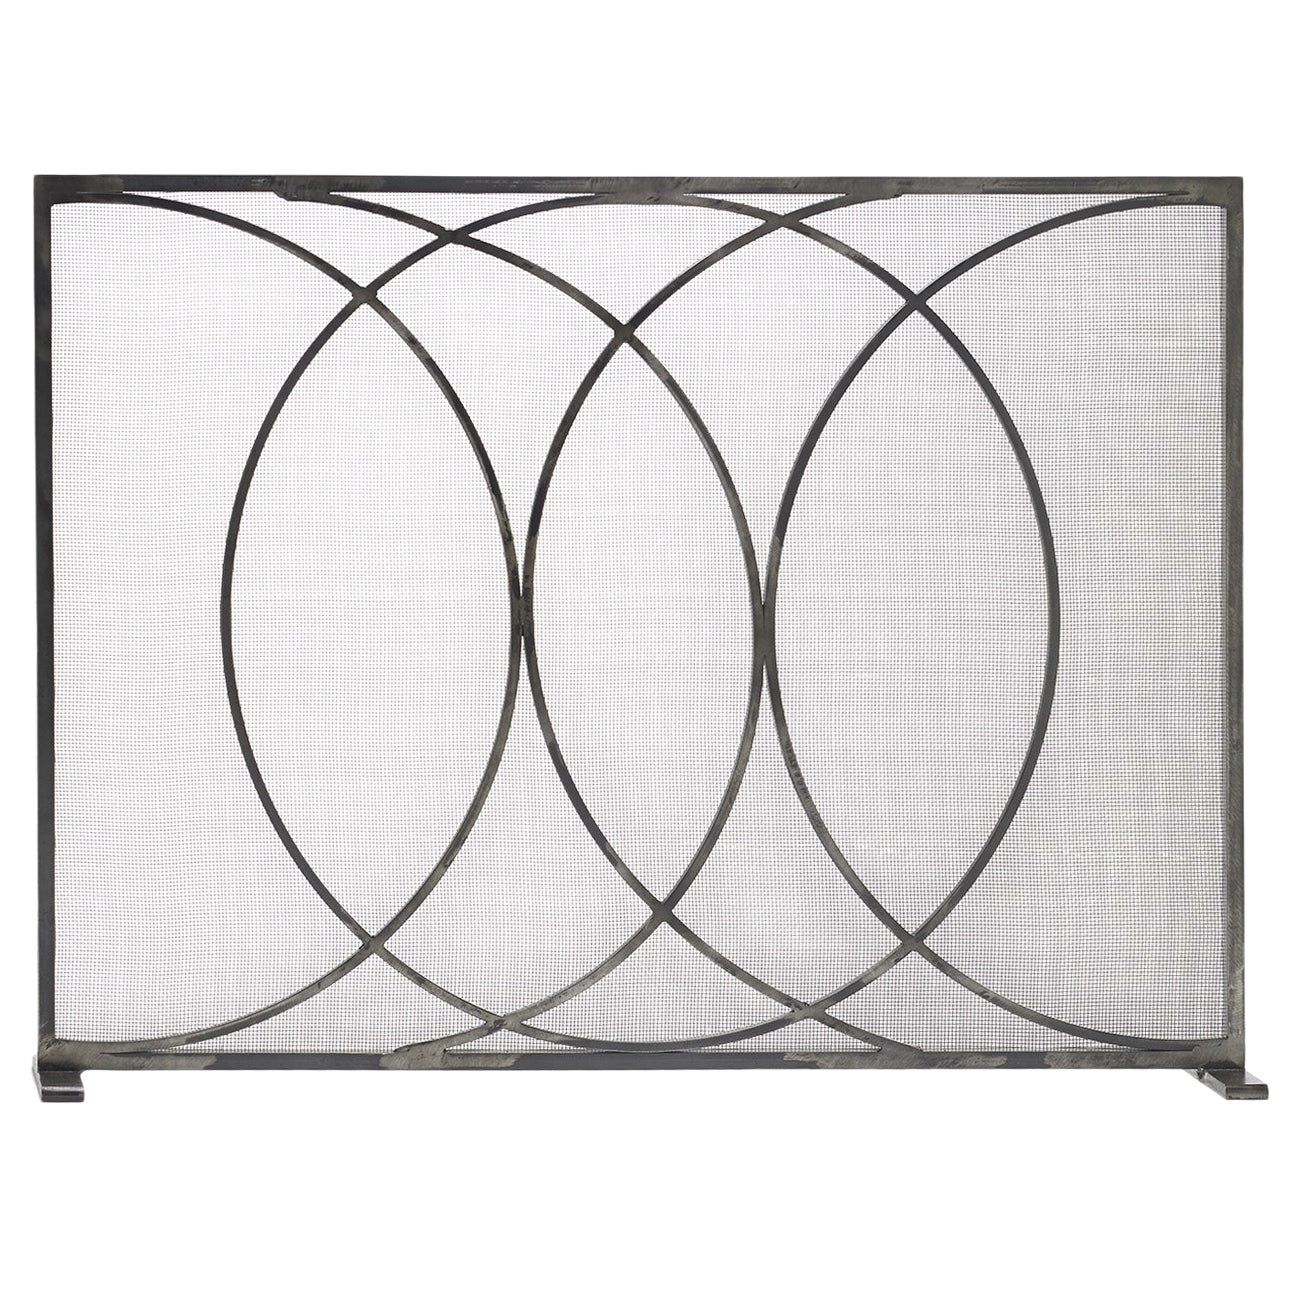 Claire Crowe, Coronet Fireplace Screen, Ready to Ship